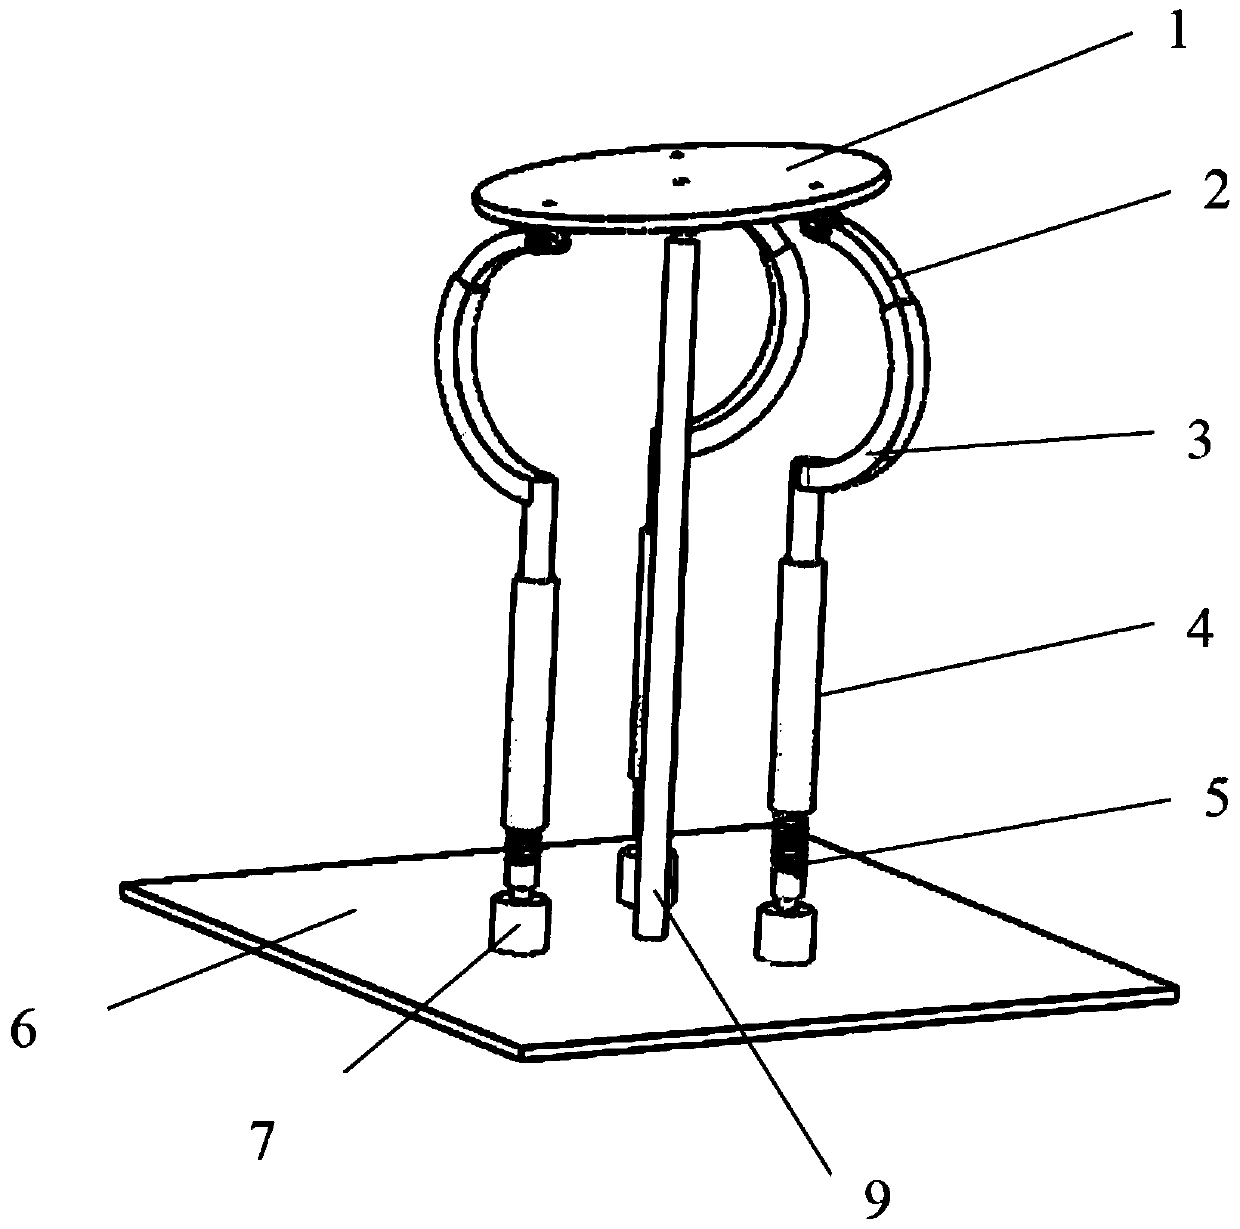 A Three Degrees of Freedom Parallel Mechanism with Arc Moving Pair